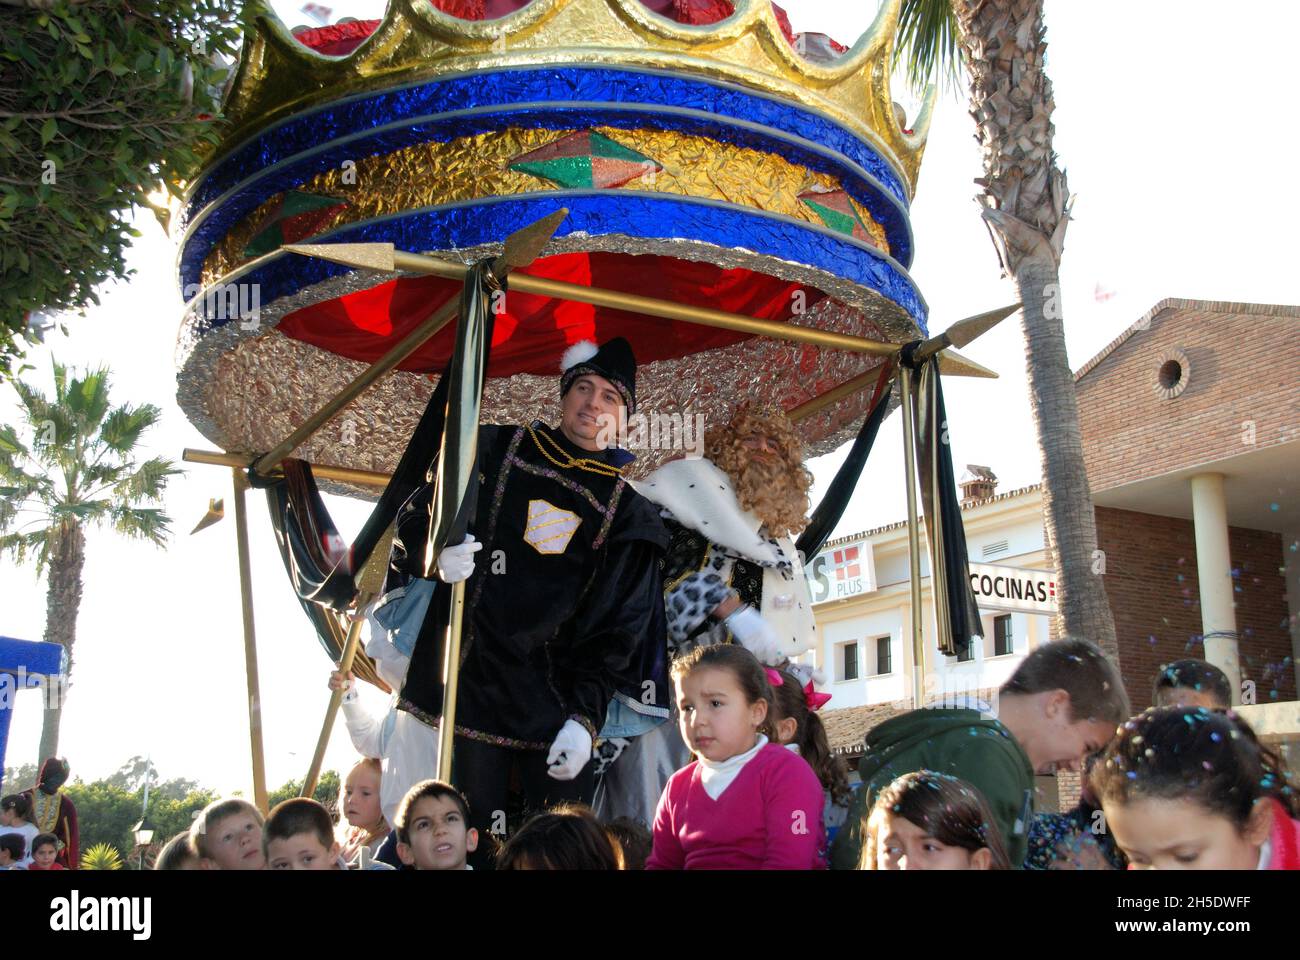 Three Kings Parade with Gaspar standing in his carriage and children sitting on the float, La Cala de Mijas, Spain Stock Photo